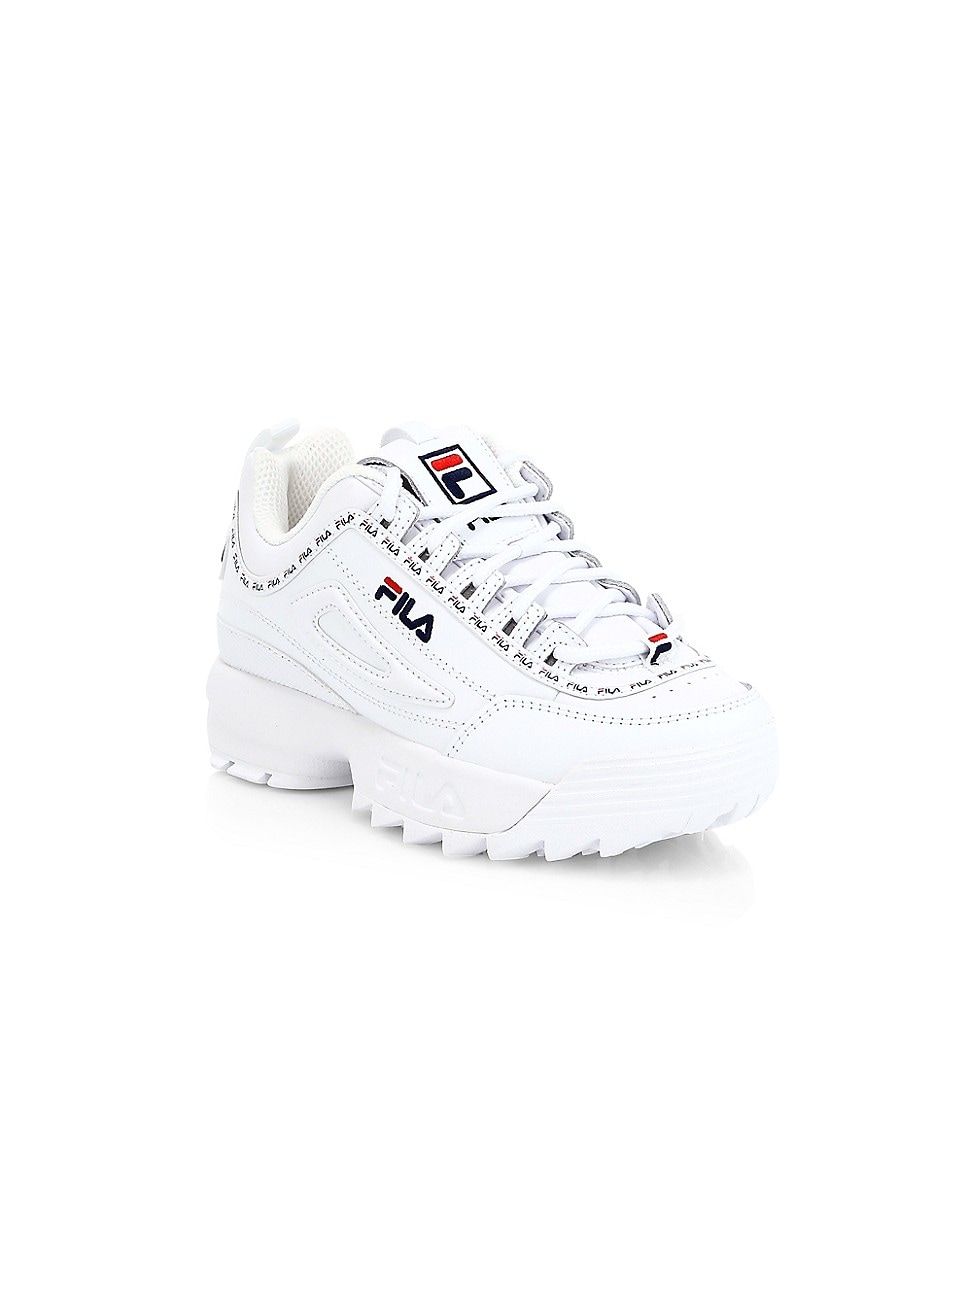 Fila Little Kid's & Kid's Disruptor Repeat Flag Chunky Sneakers - White - Size 12 (Child) | Saks Fifth Avenue